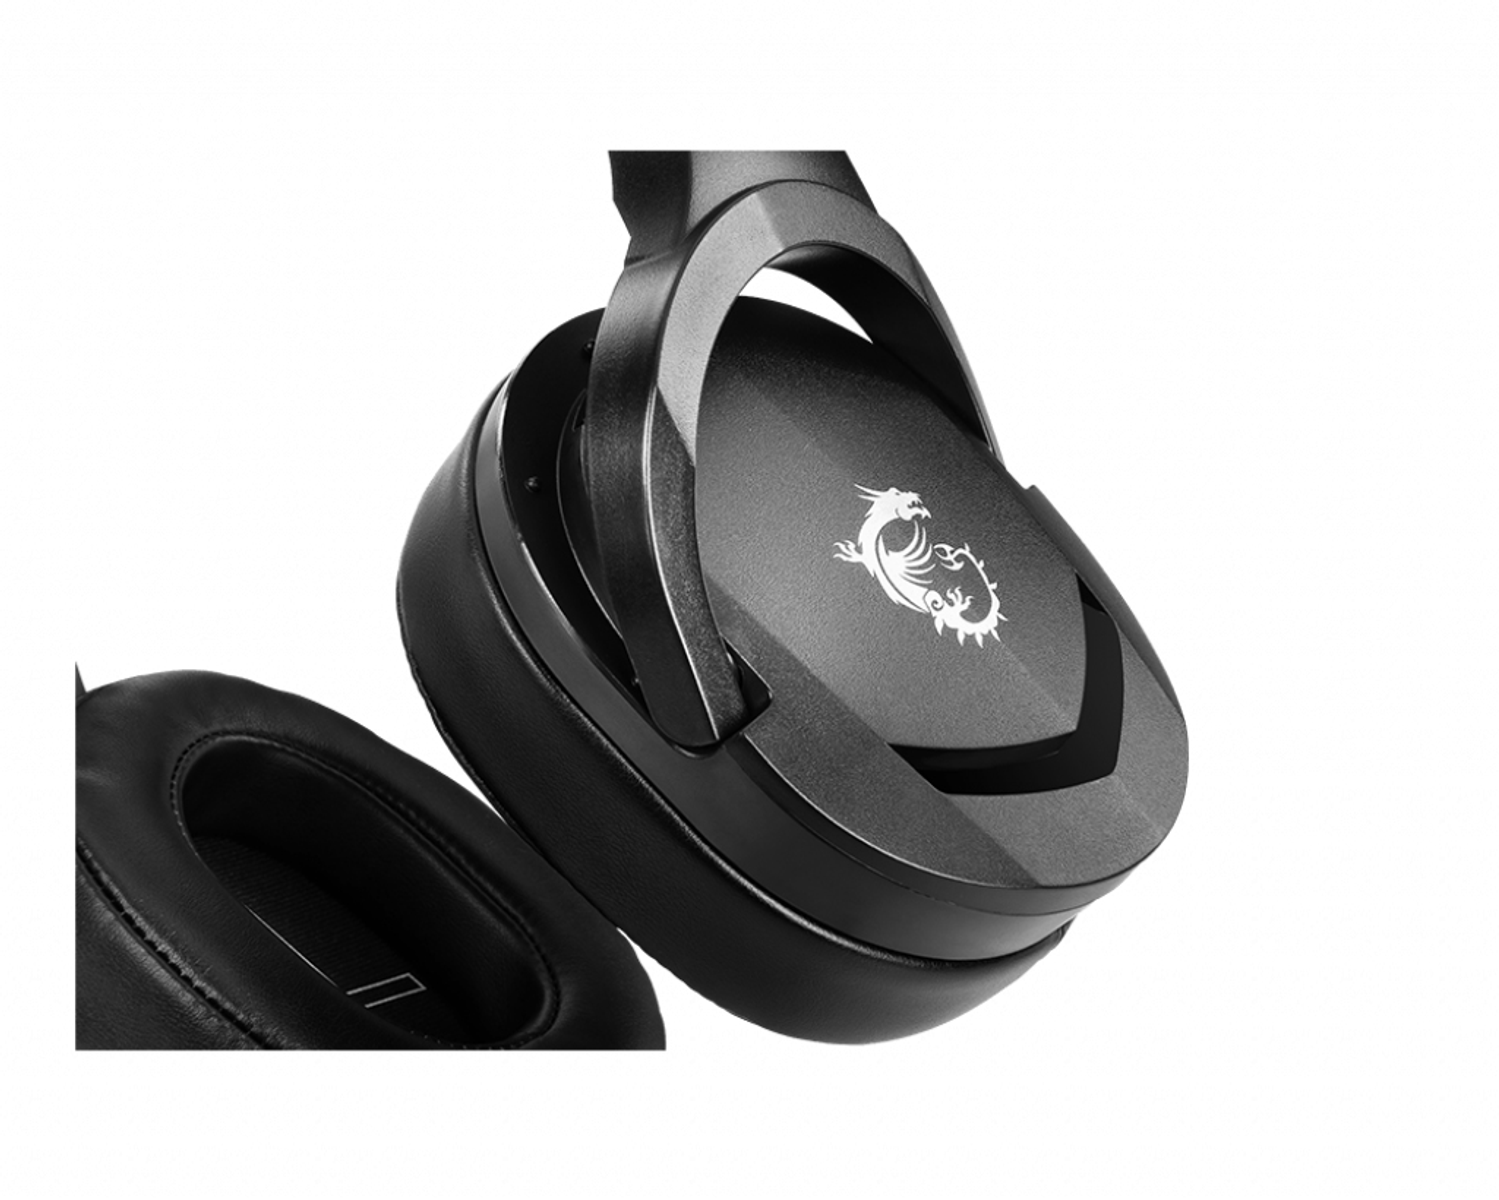 MSI S37-2101030-SV1 IMMERSE GH20, Over-ear Schwarz Headset Gaming